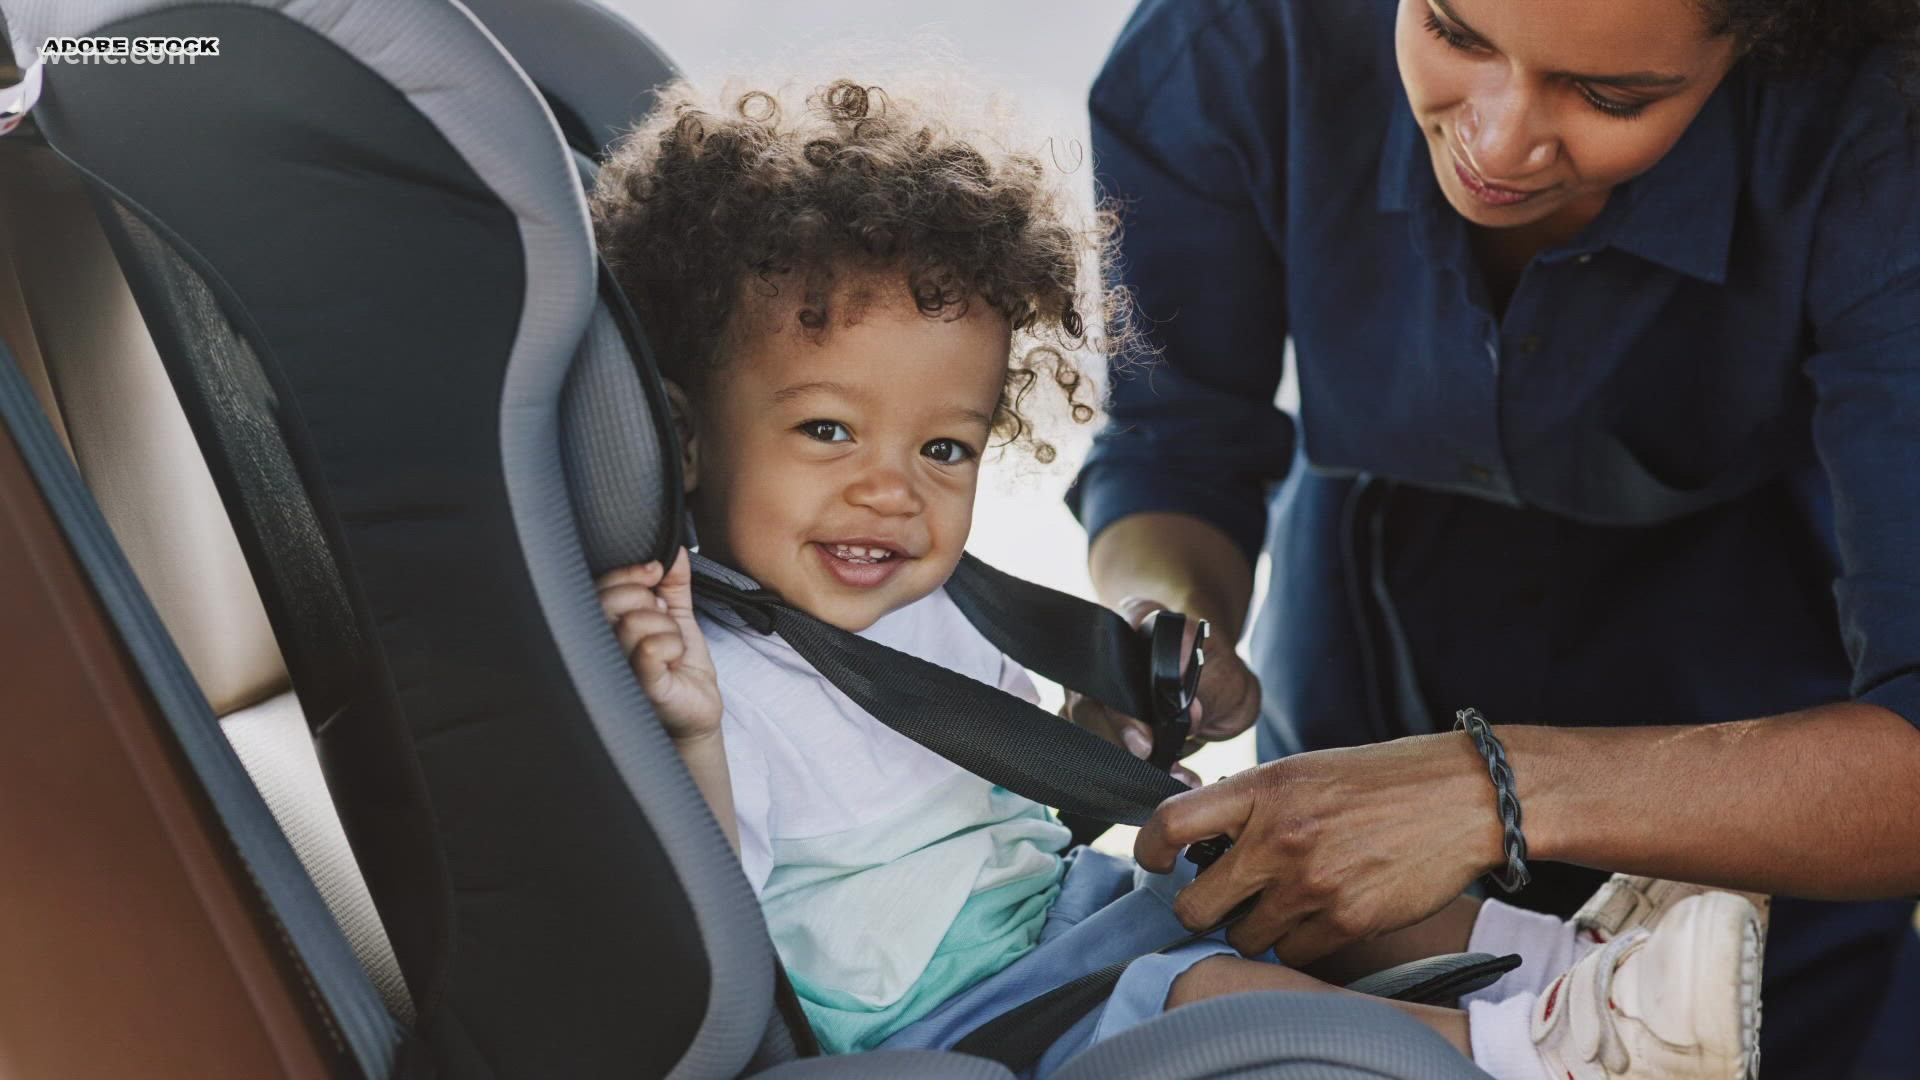 We know parents have questions about their child's car seat and want to ensure they're installed properly. Our VERIFY team answers those questions and more.